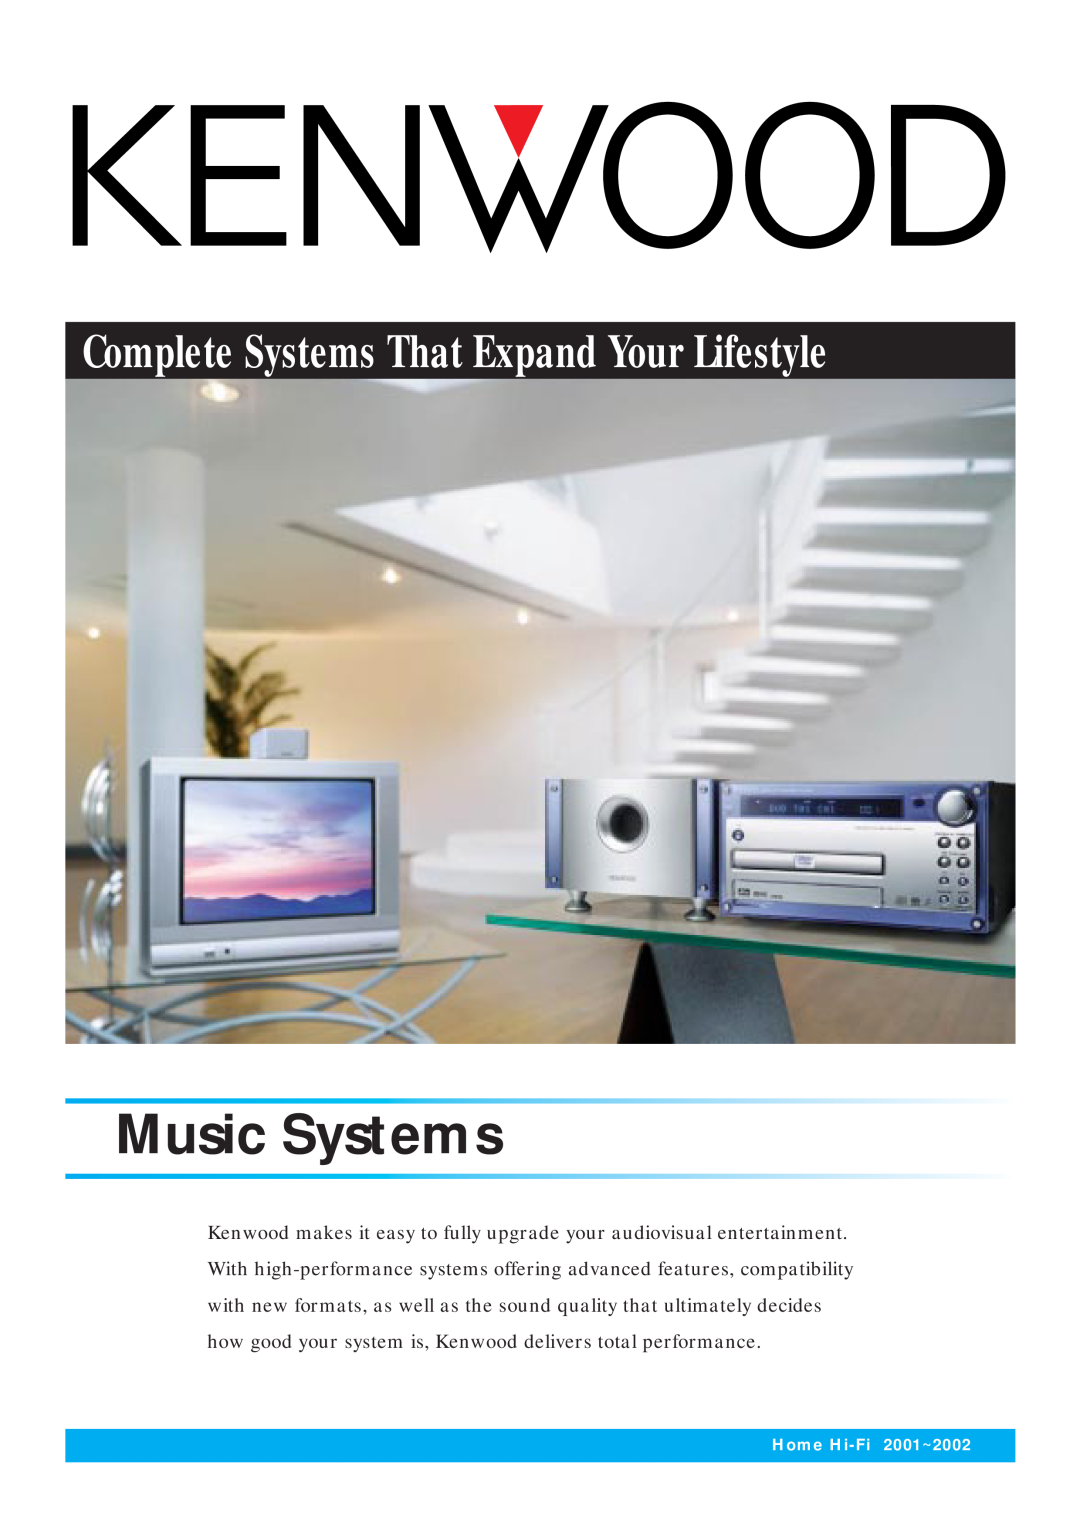 Kenwood HM-DV7, HM-982RW, HM-383MD manual Music Systems, Complete Systems That Expand Your Lifestyle, Home Hi-Fi2001~2002 